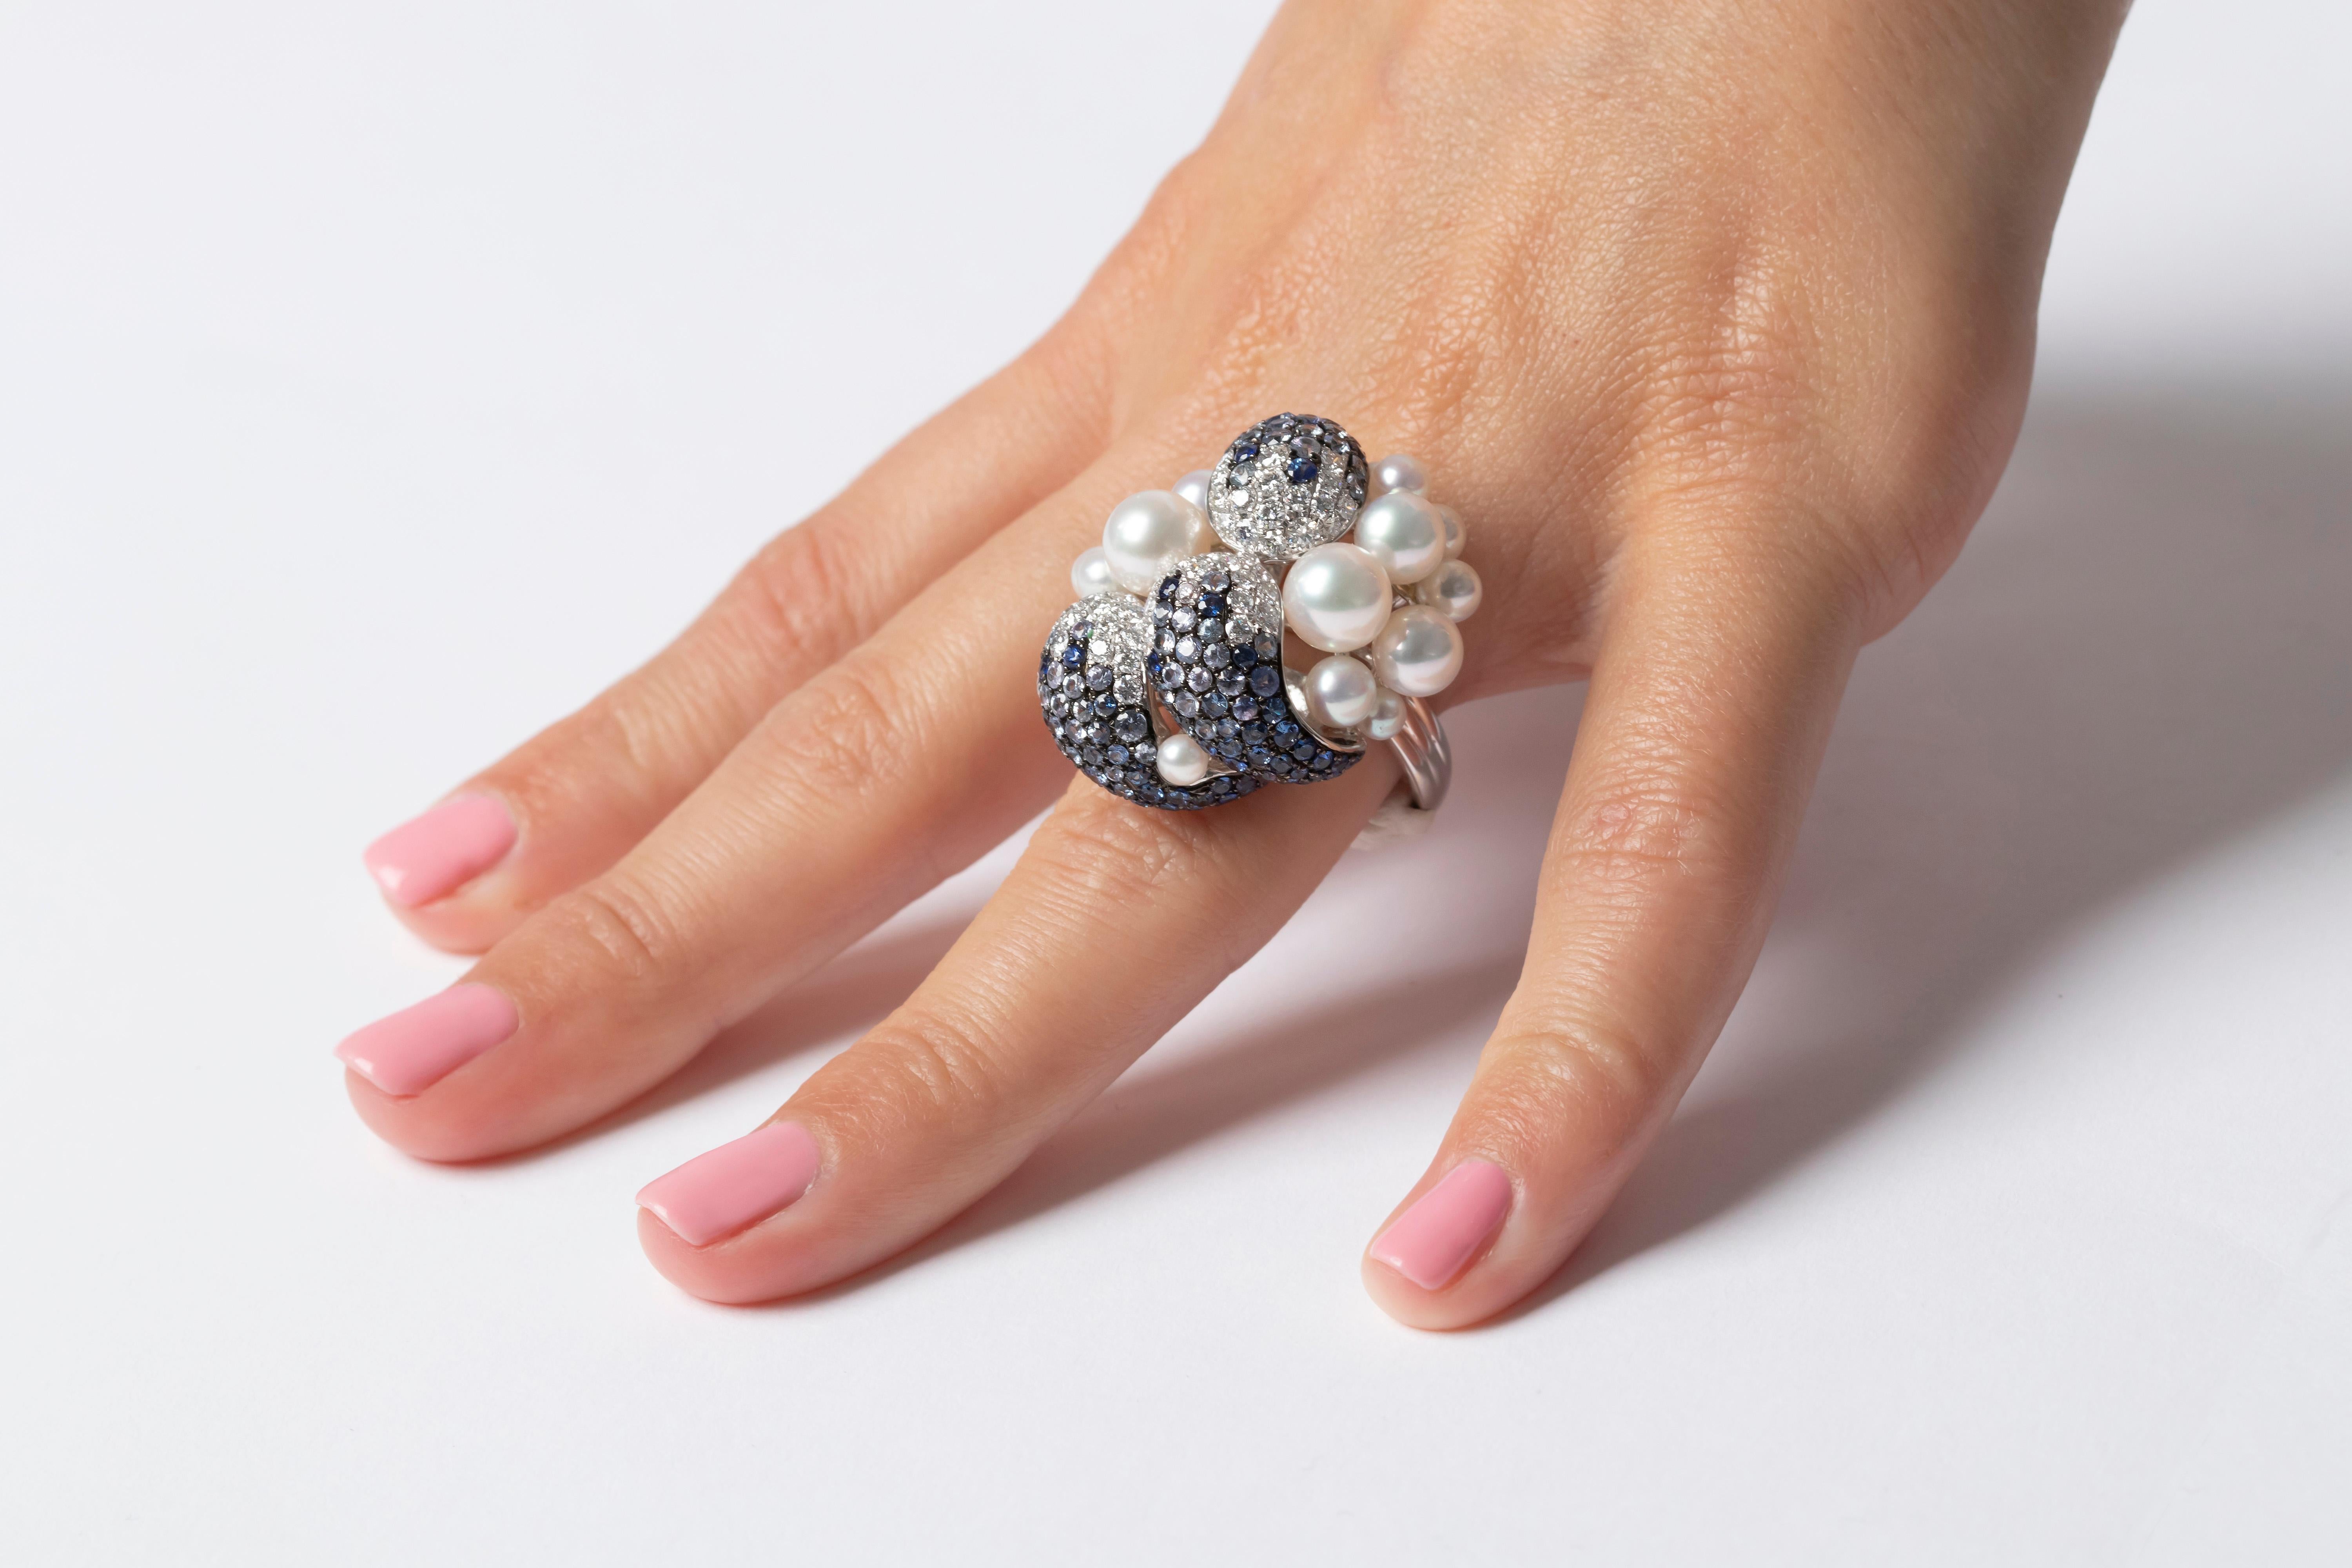 A stunning cocktail ring by Yoko London featuring an eclectic array of blue sapphires, diamonds and Japanese Akoya pearls. This statement ring is a one-of-a-kind design, which is sure to set you apart from the crowd. Complete the look with the